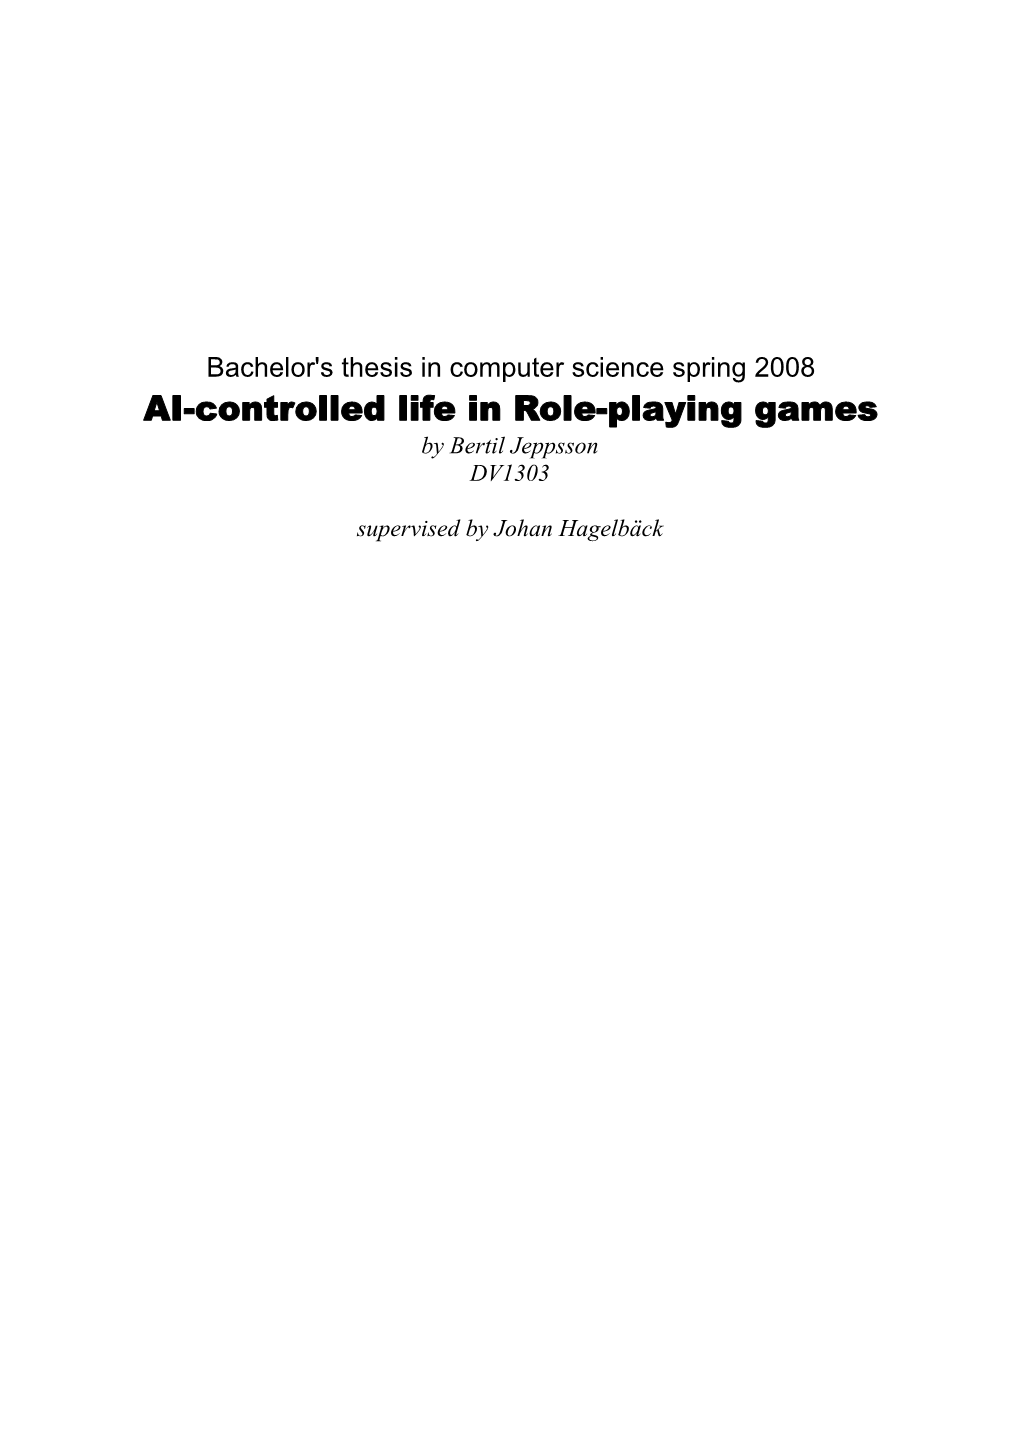 AI-Controlled Life in Role-Playing Games by Bertil Jeppsson DV1303